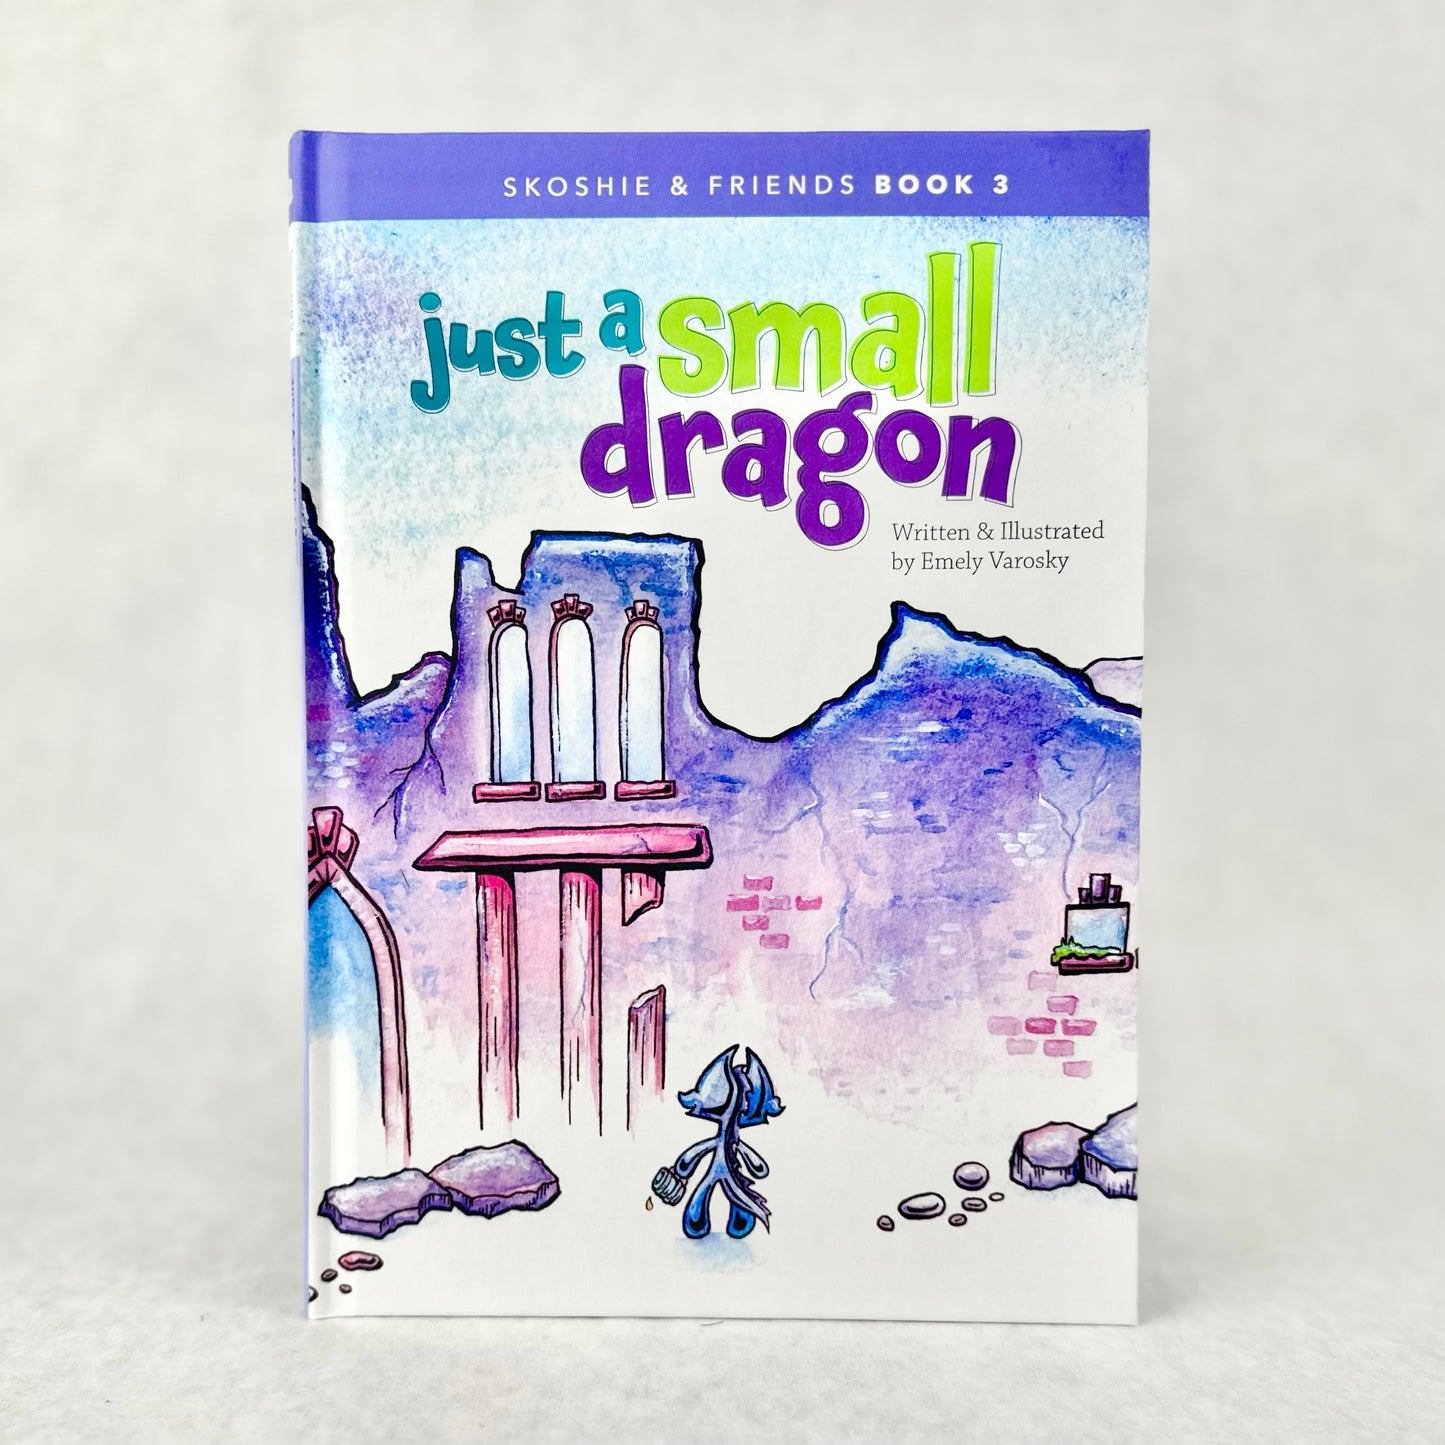 Book 3: "Just a Small Dragon" (signed)